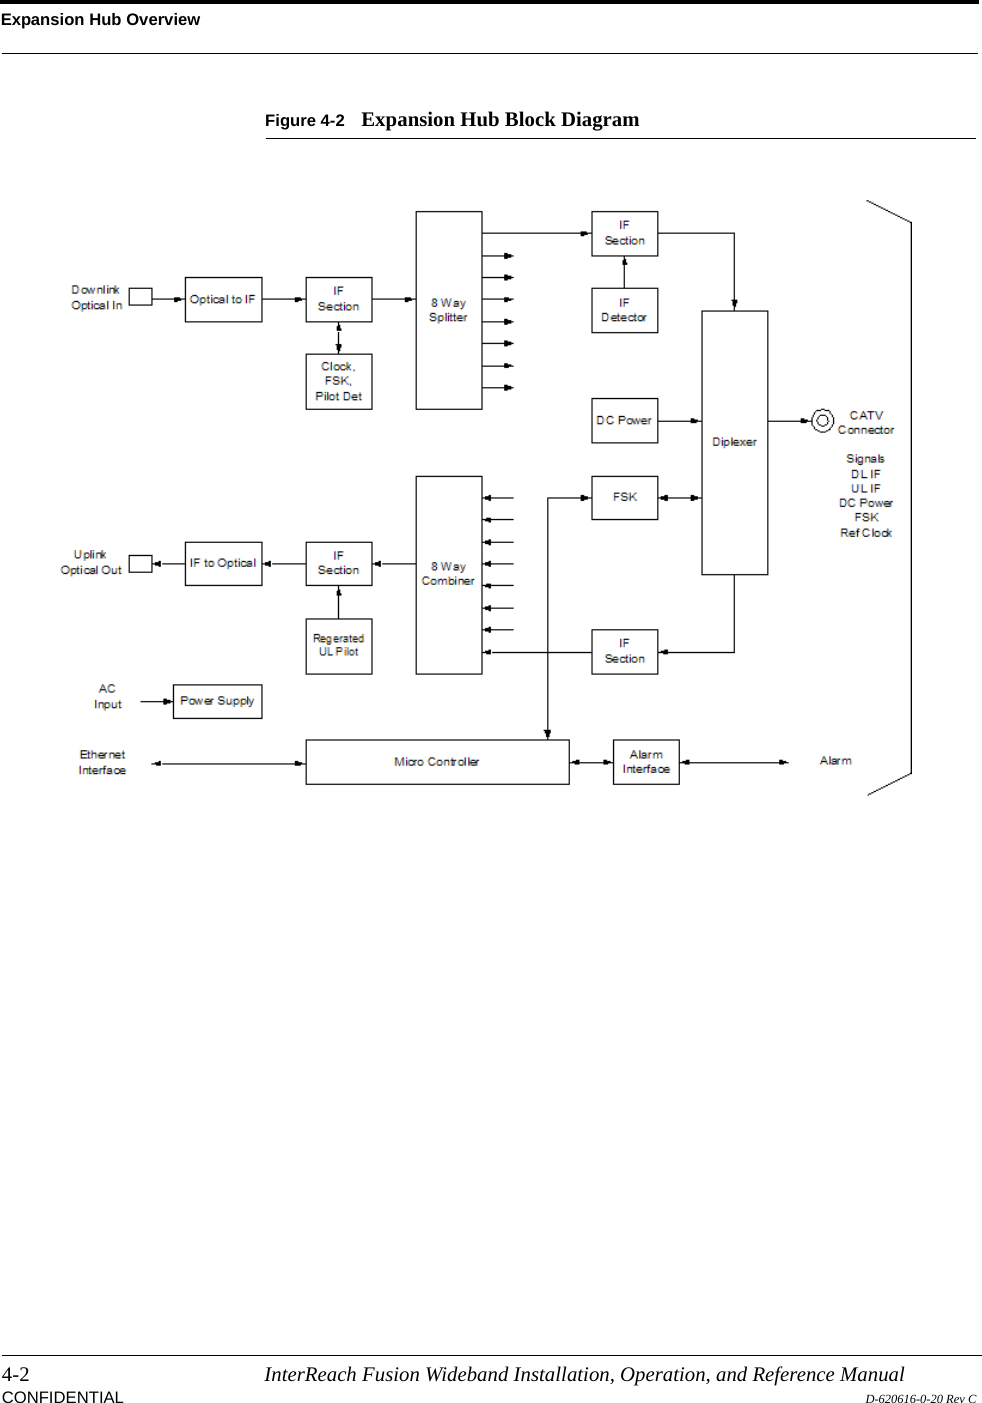 Expansion Hub Overview4-2 InterReach Fusion Wideband Installation, Operation, and Reference ManualCONFIDENTIAL D-620616-0-20 Rev CFigure 4-2 Expansion Hub Block Diagram